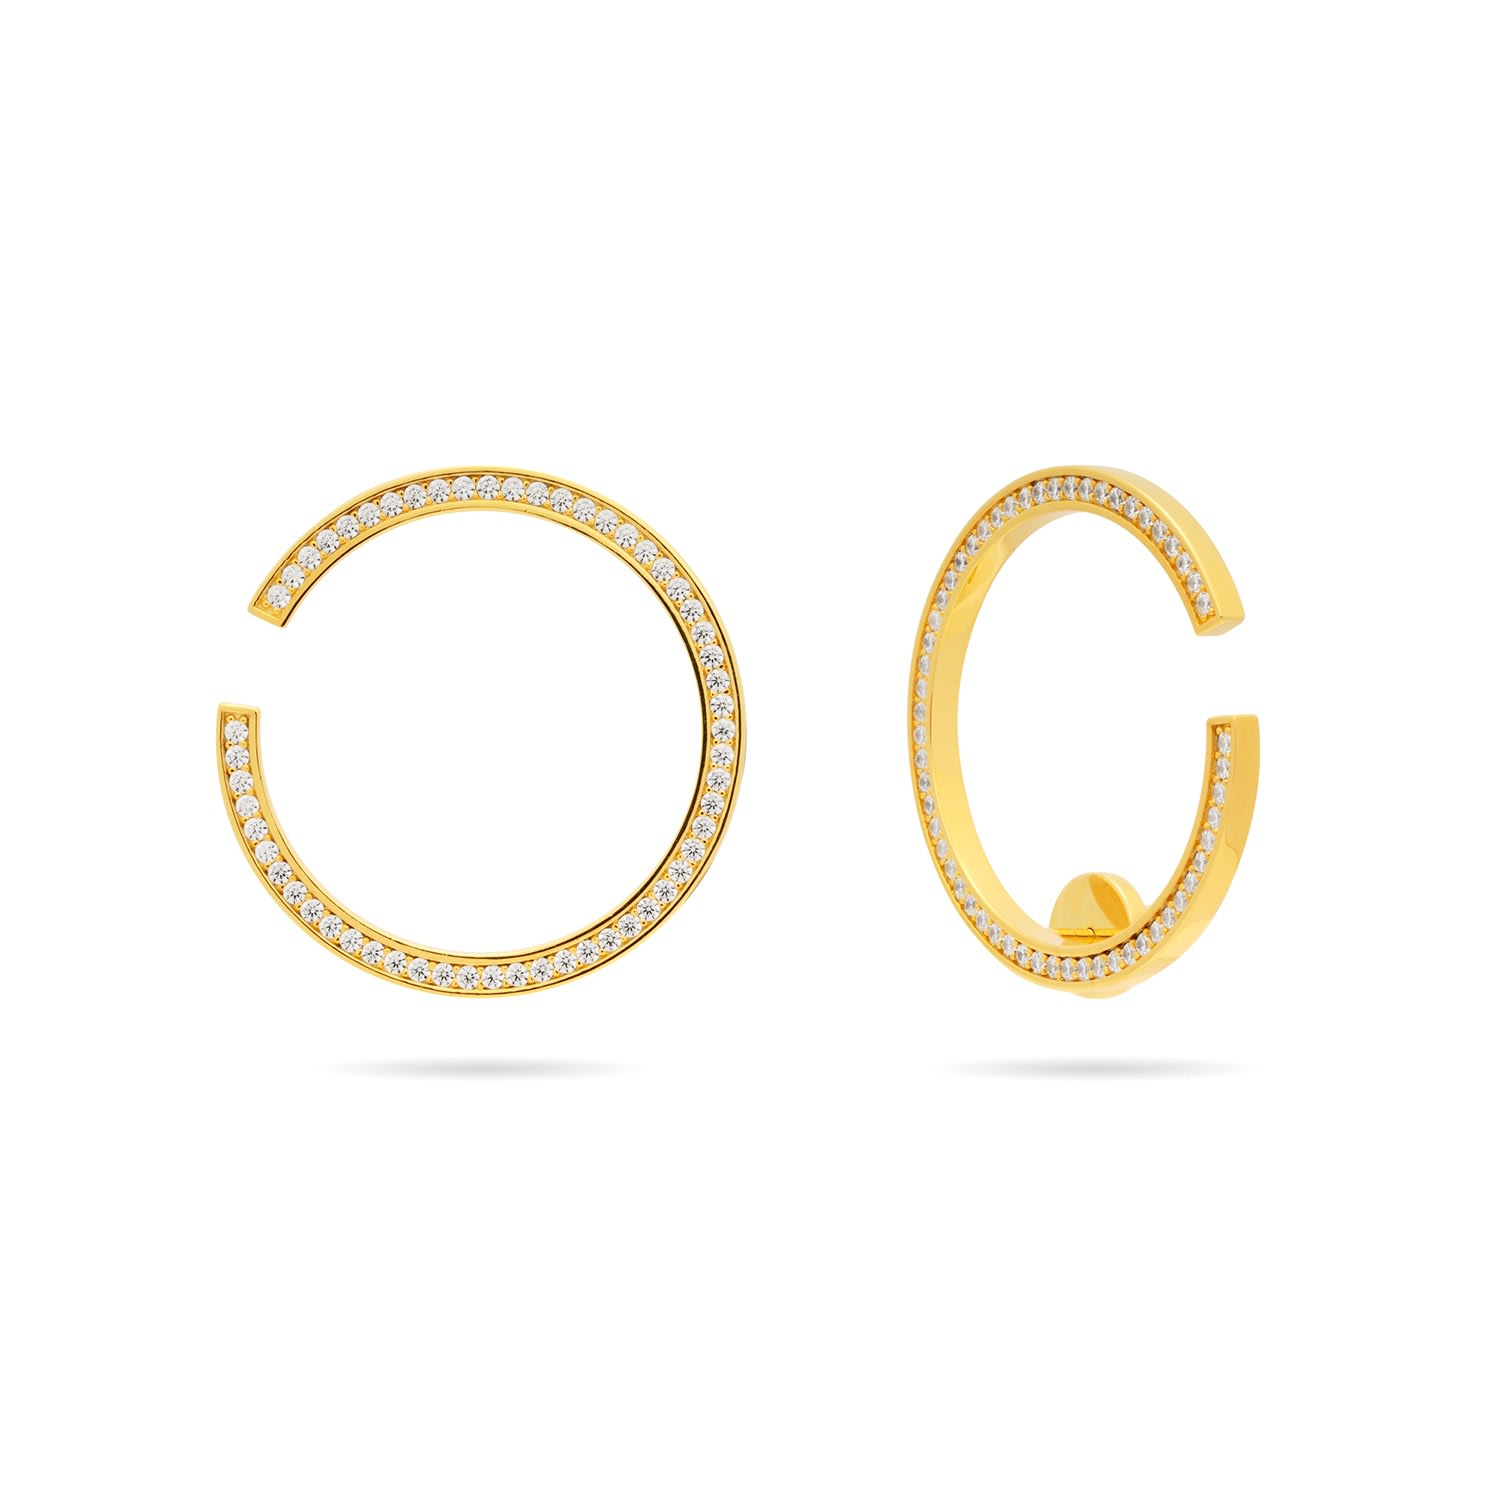 Women’s Large Hoop And Cuff Earrings With Pave Cz - Gold Meulien